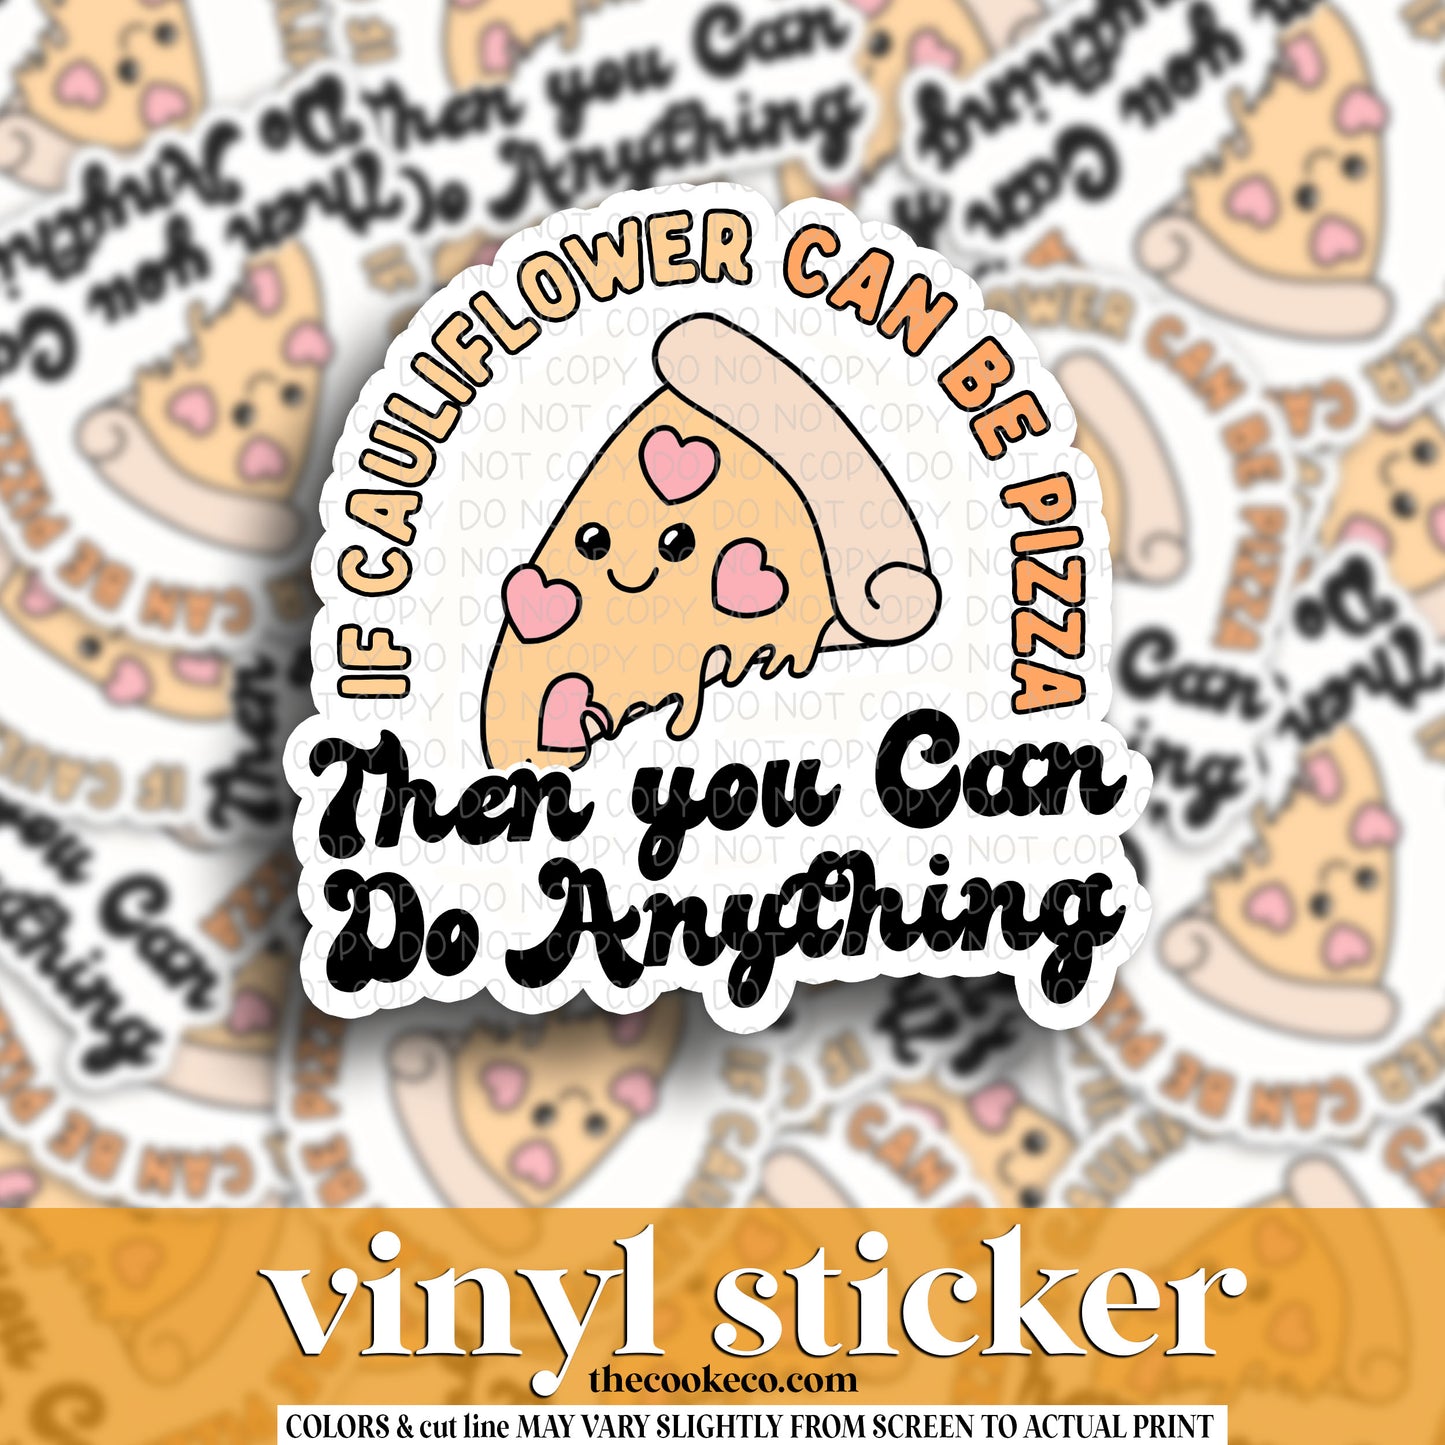 Vinyl Sticker | #V1561 -  IF CAULIFLOWER CAN BE PIZZA THEN YOU CAN BE ANYTHING